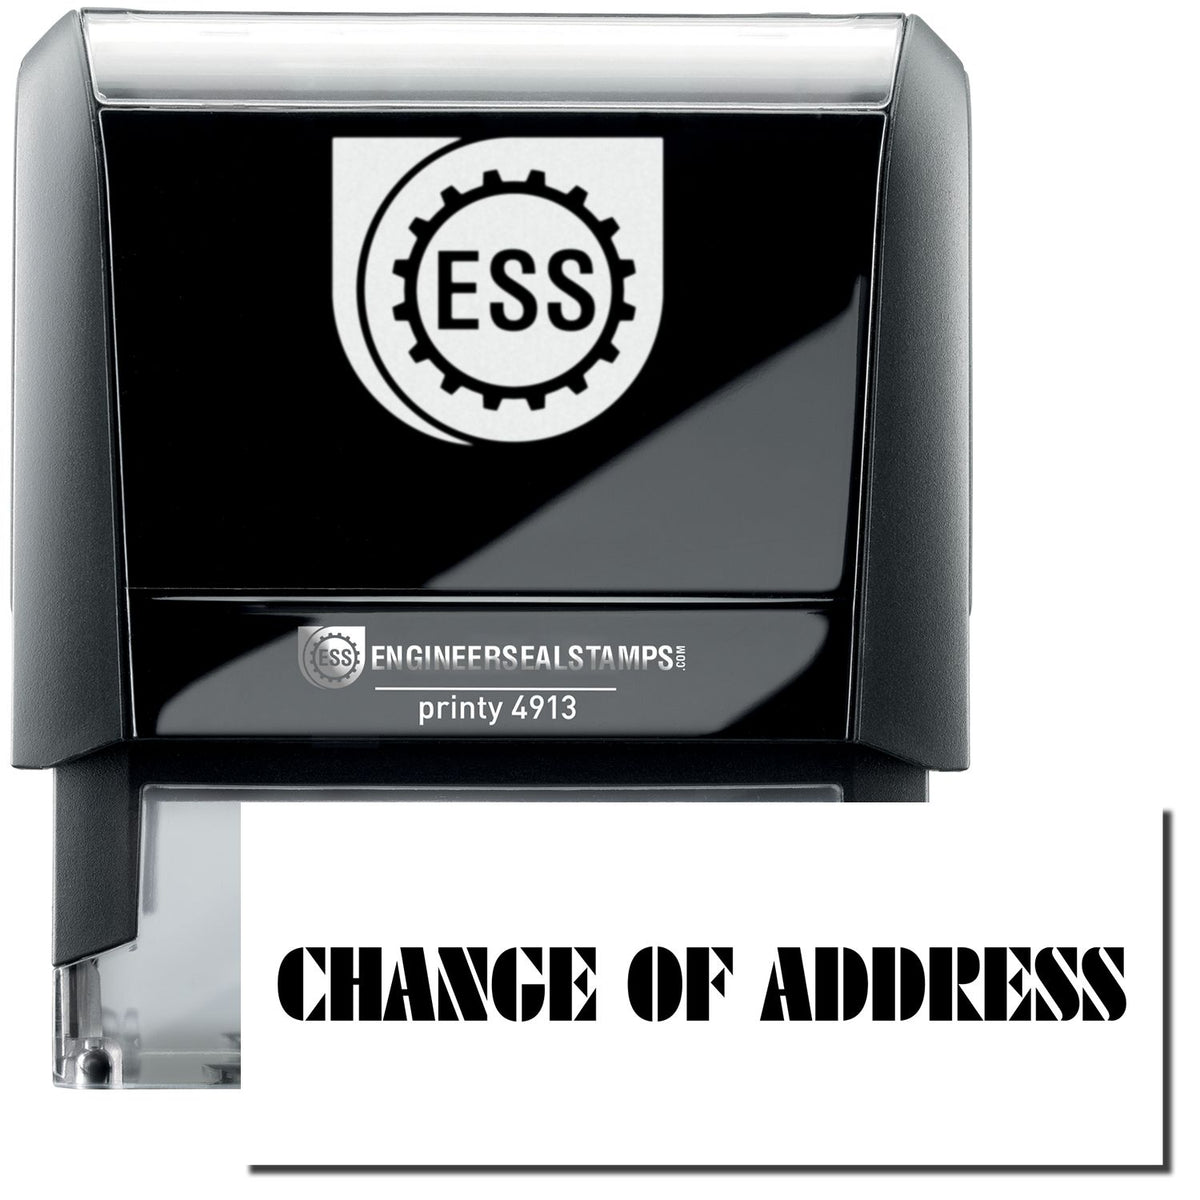 A self-inking stamp with a stamped image showing how the text &quot;CHANGE OF ADDRESS&quot; in a unique-looking large bold font is displayed by it.